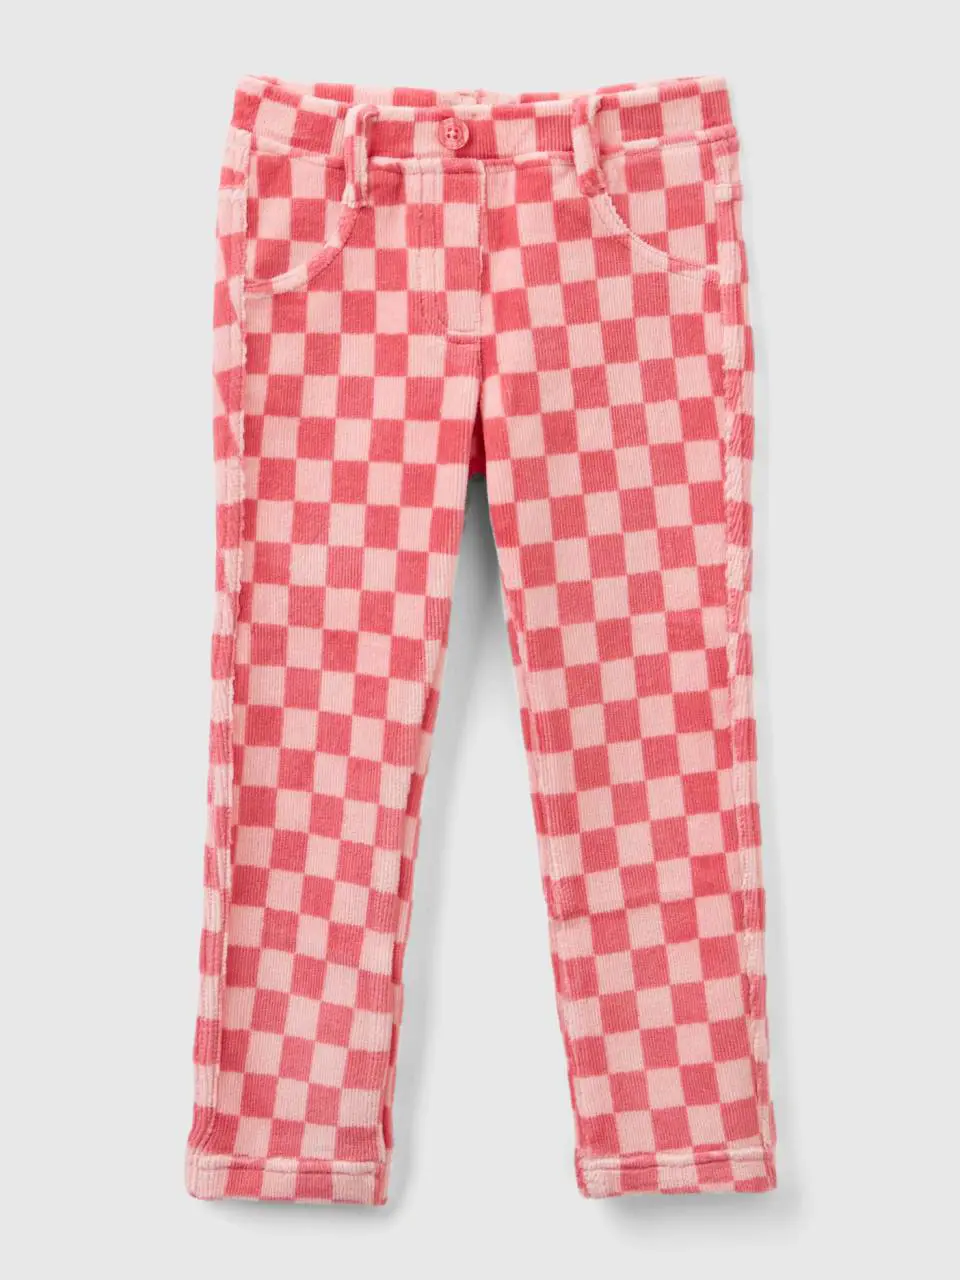 Benetton pink jeggings with checkered print. 1